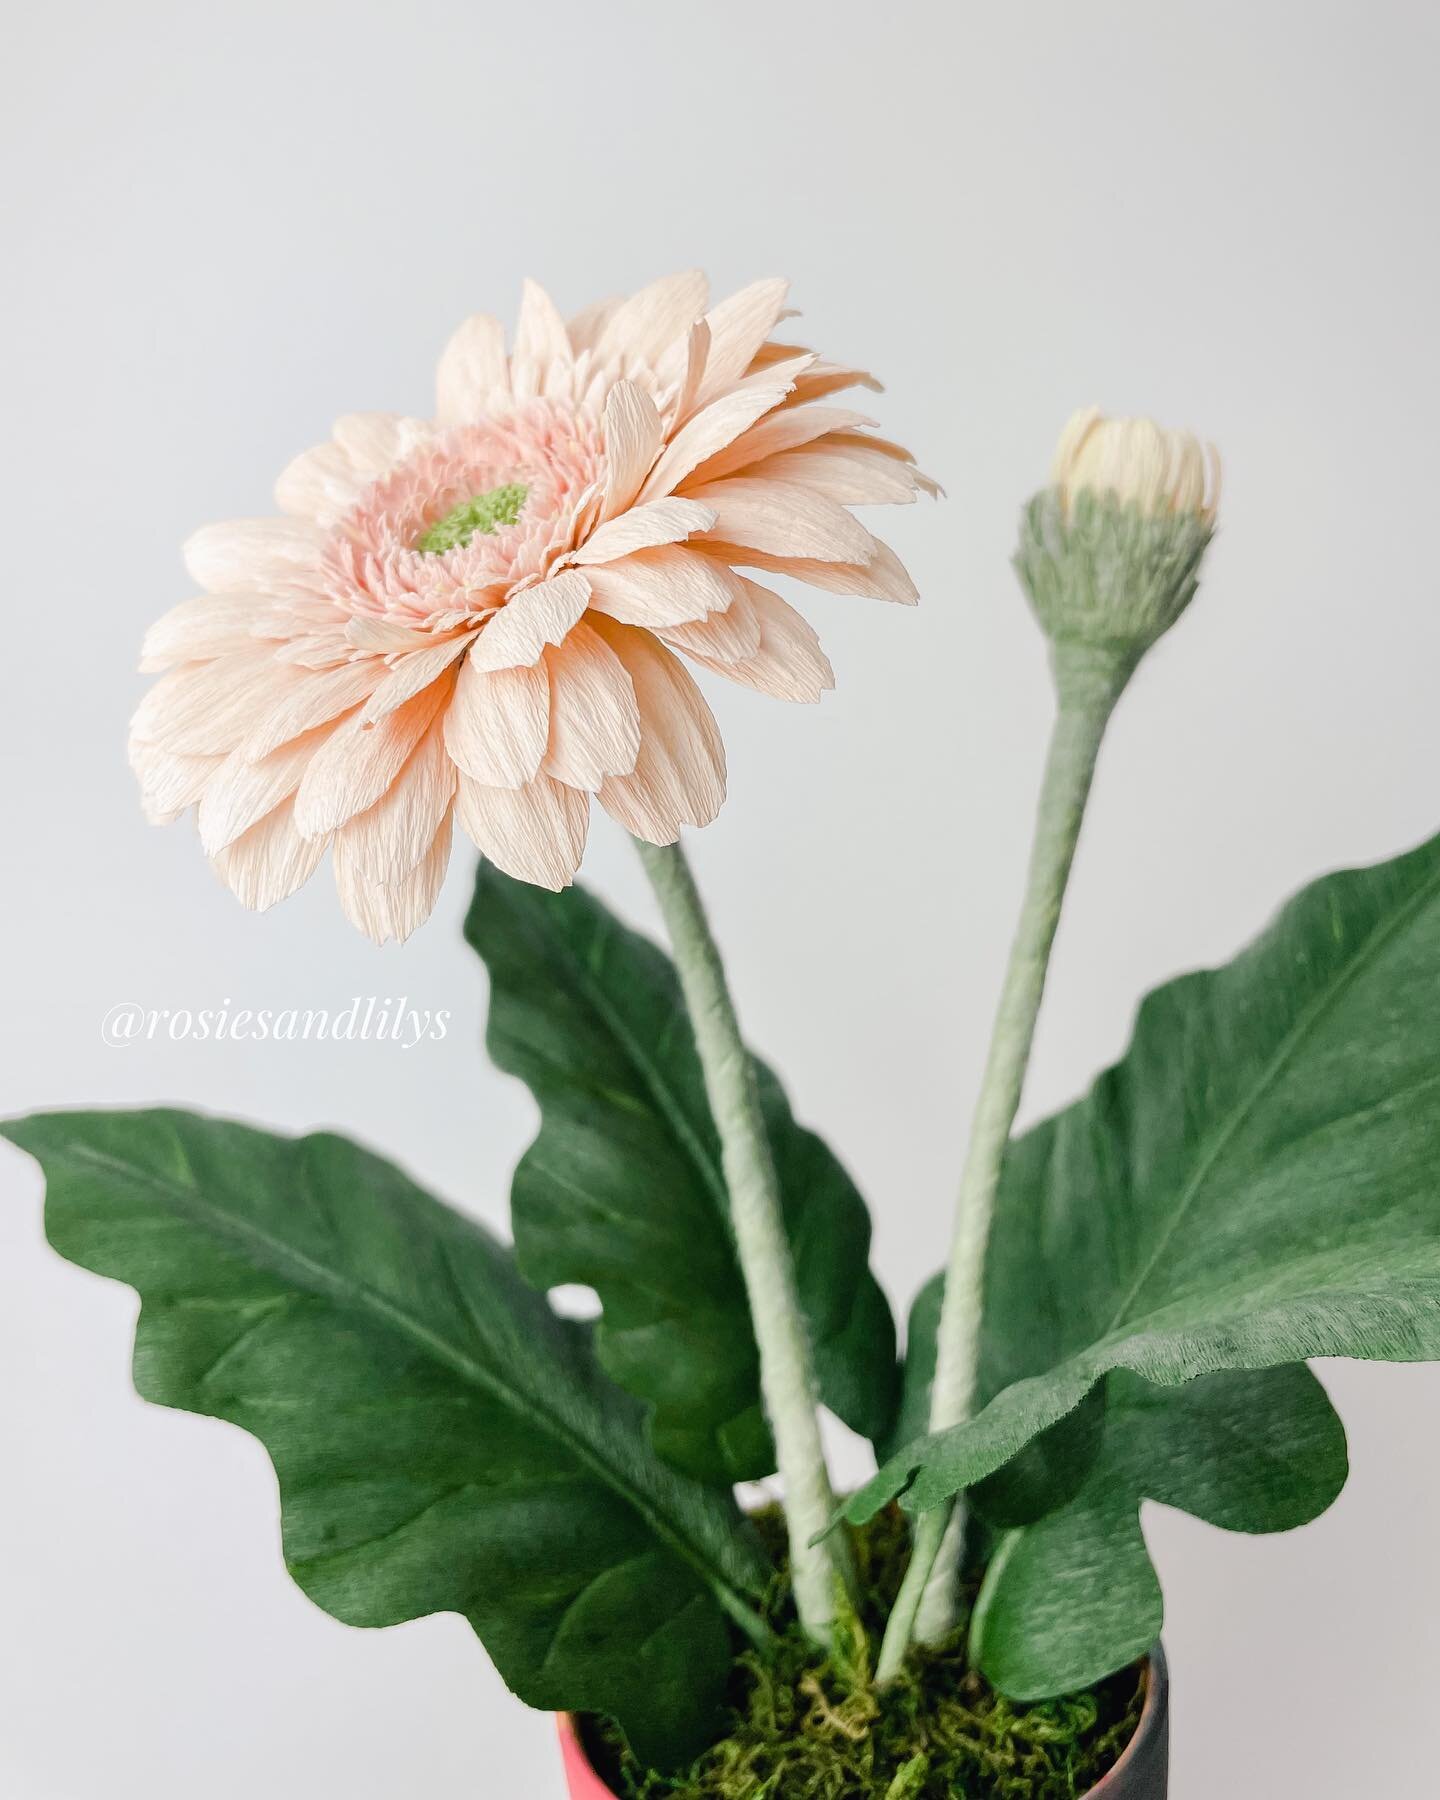 A cute potted gerbera daisy plant for today. The pot was painted by my daughter as a gift to her teacher.  The blooming flower represent the teacher, the little bud represents my daughter growing.  So sweet! 😉
.
.
.
#gerberadaisy #papergerberadaisy 